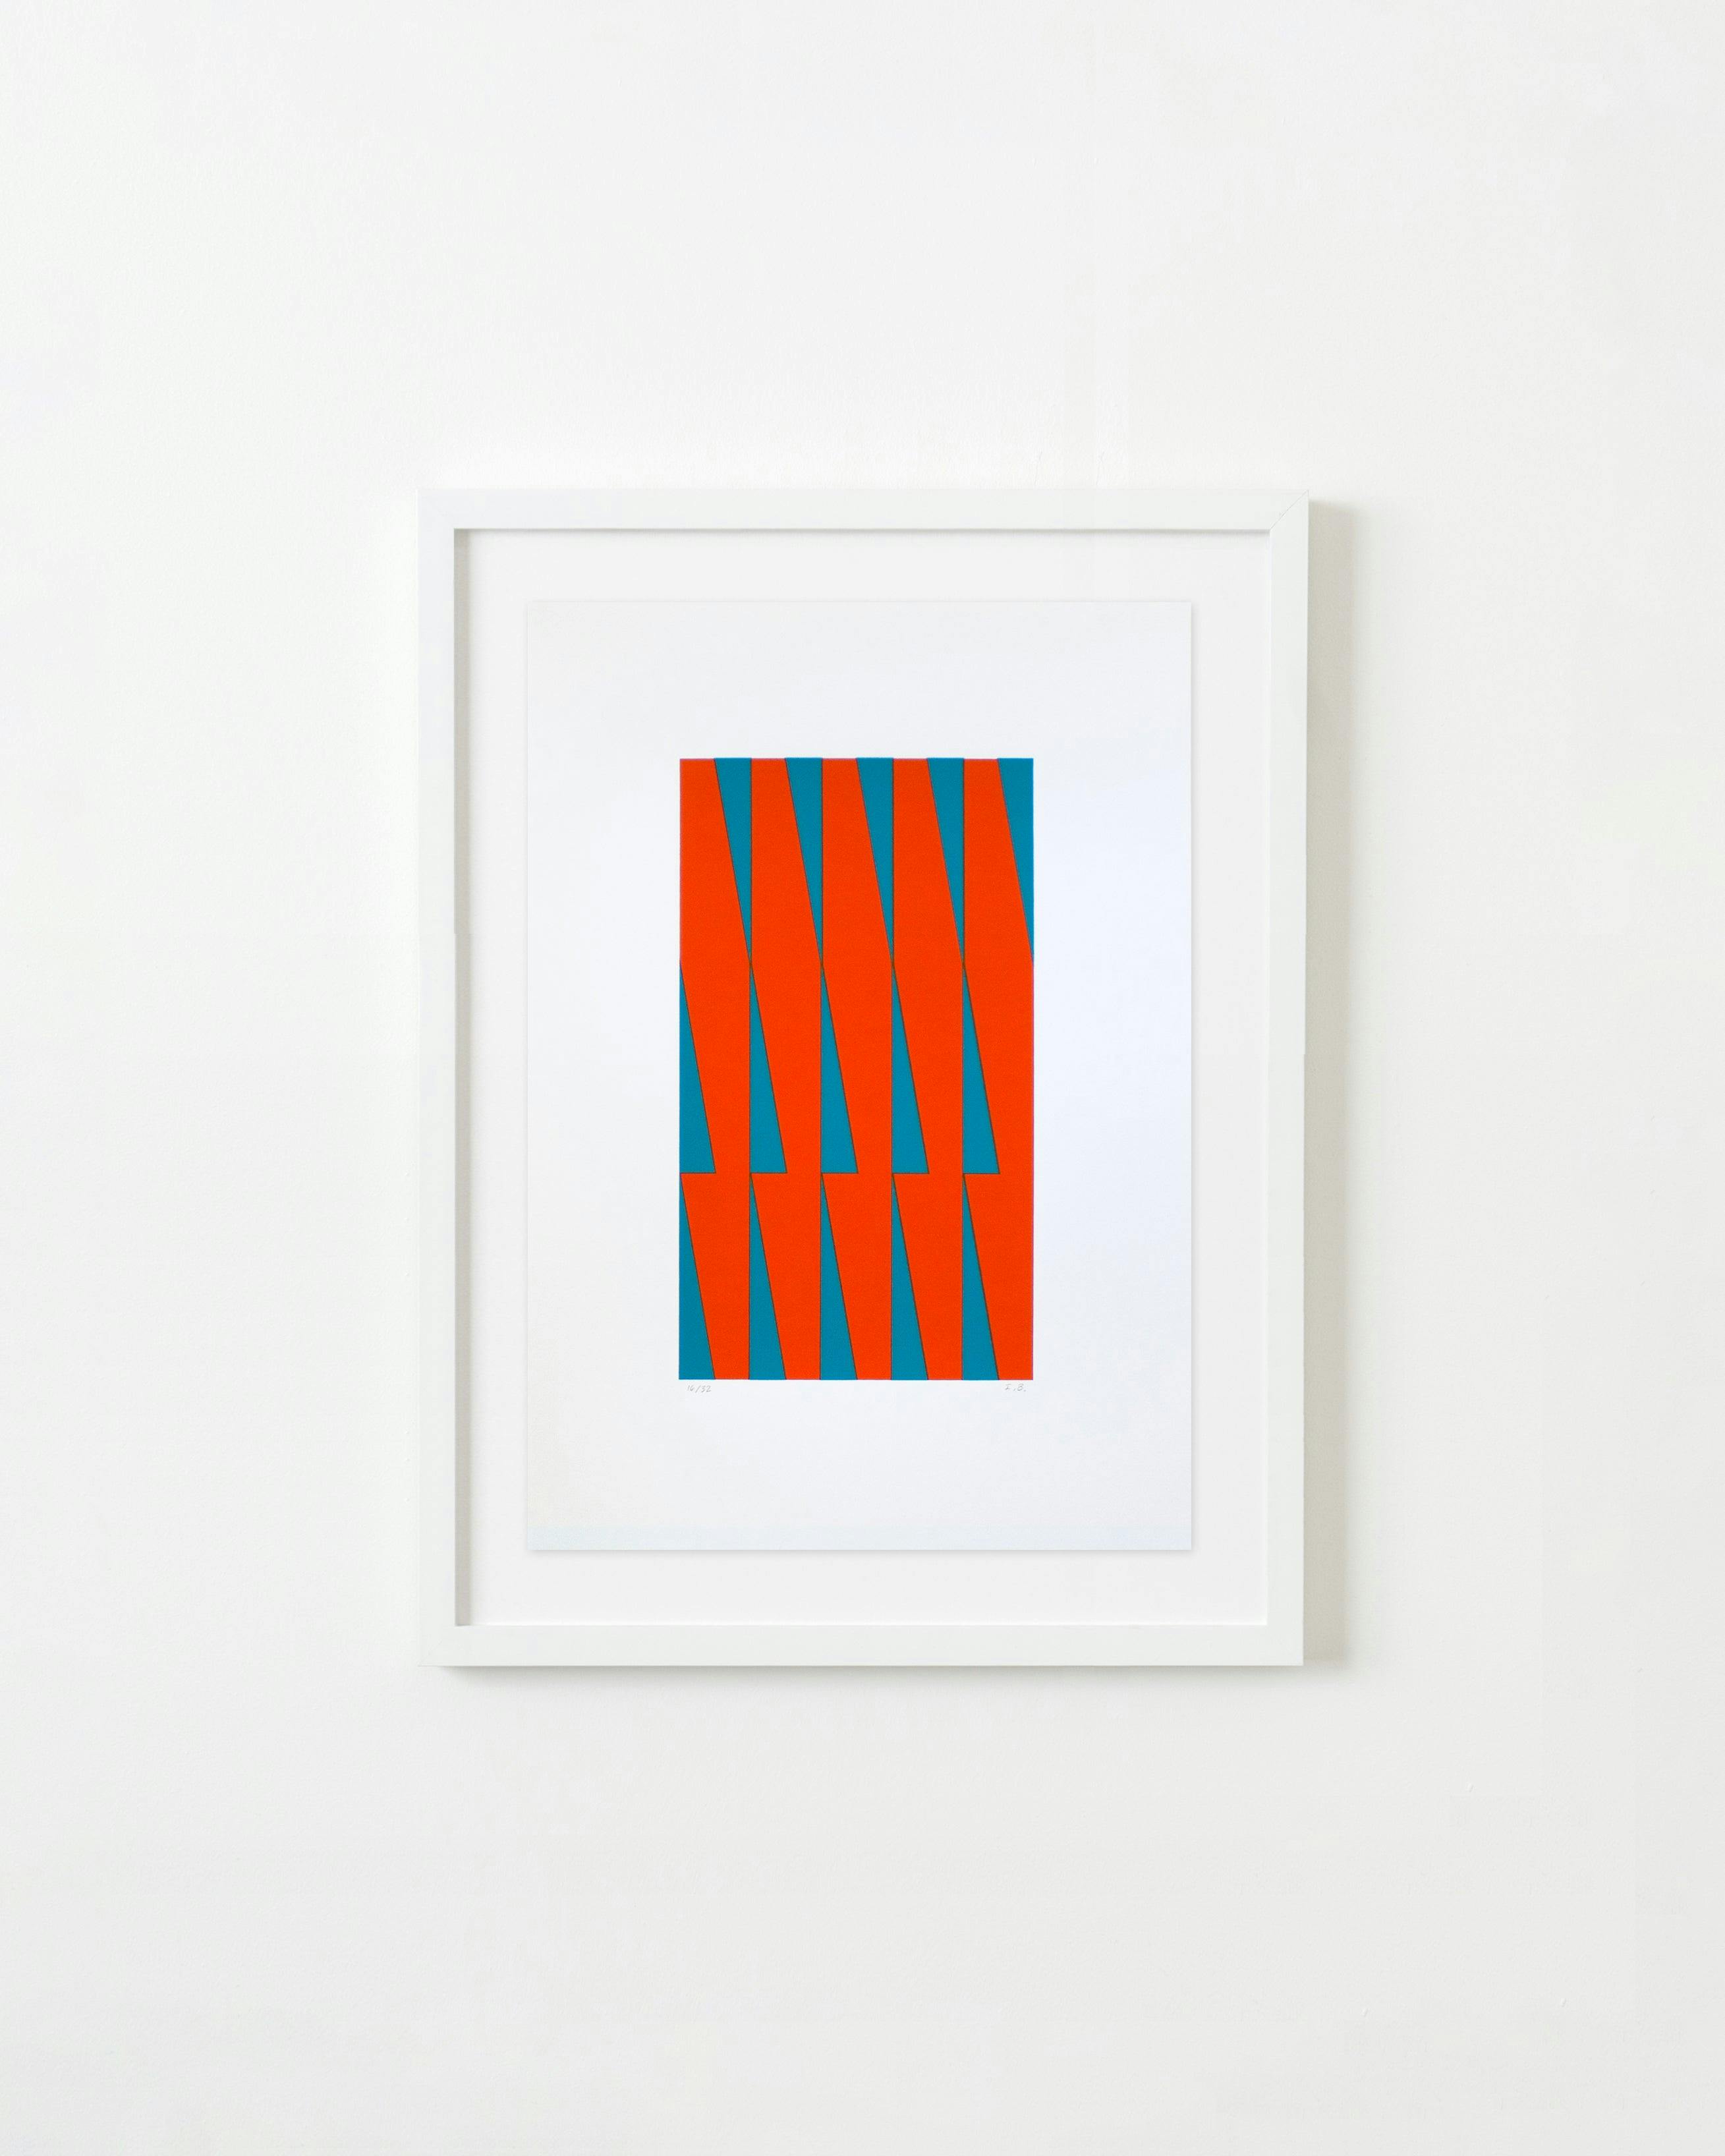 Print by Inka Bell titled "ROR 13".